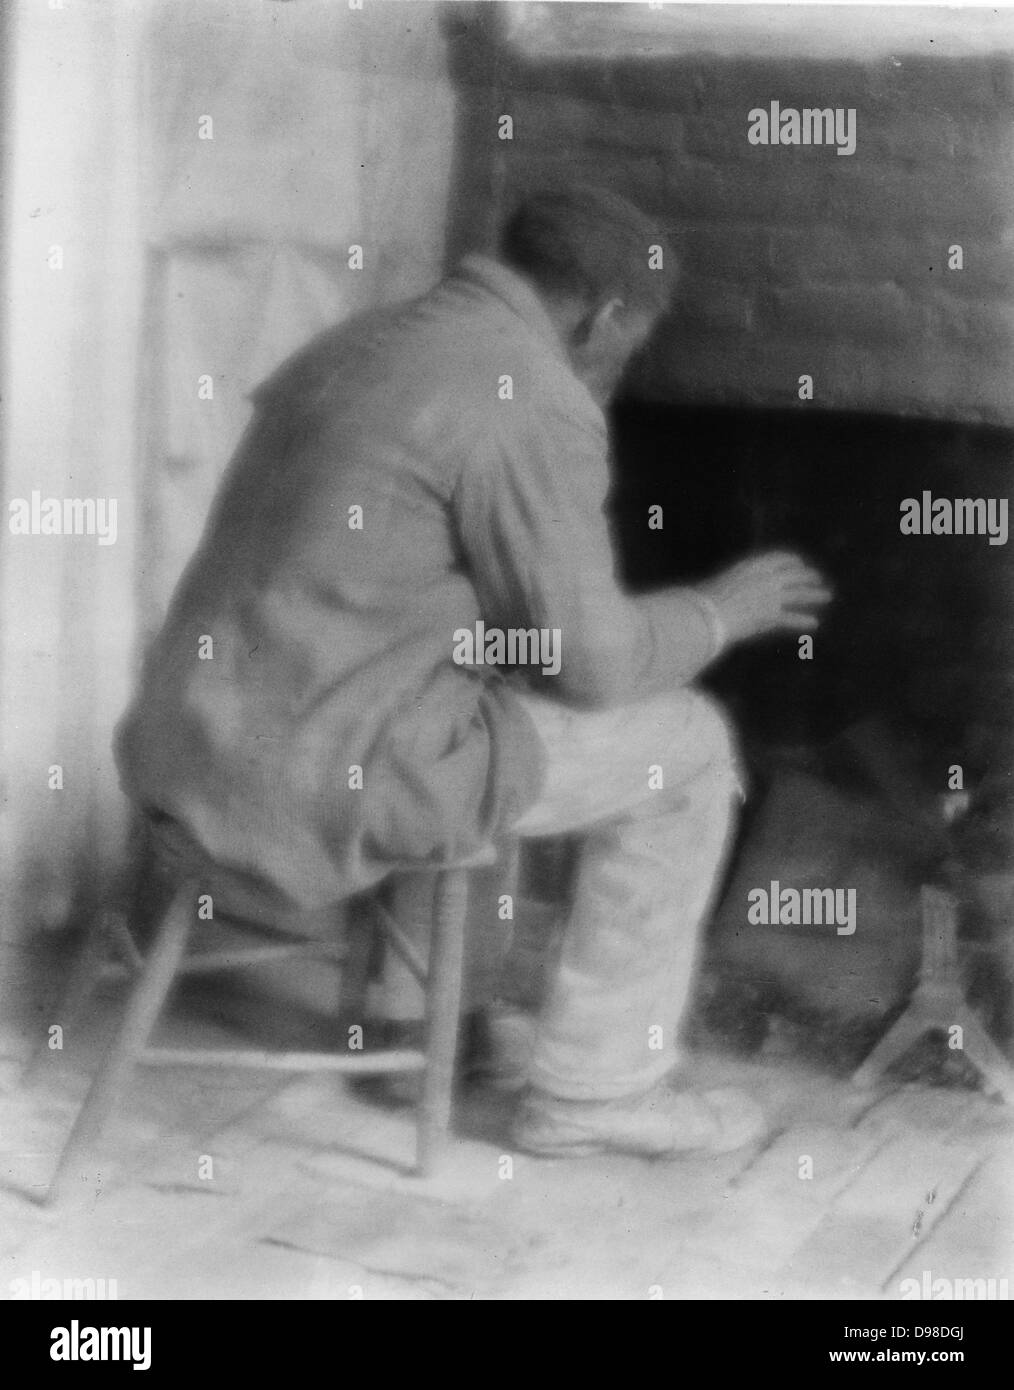 African American, possibly a former slave, sitting warming himslef by the fire in his room. Photograph c1800. Stock Photo